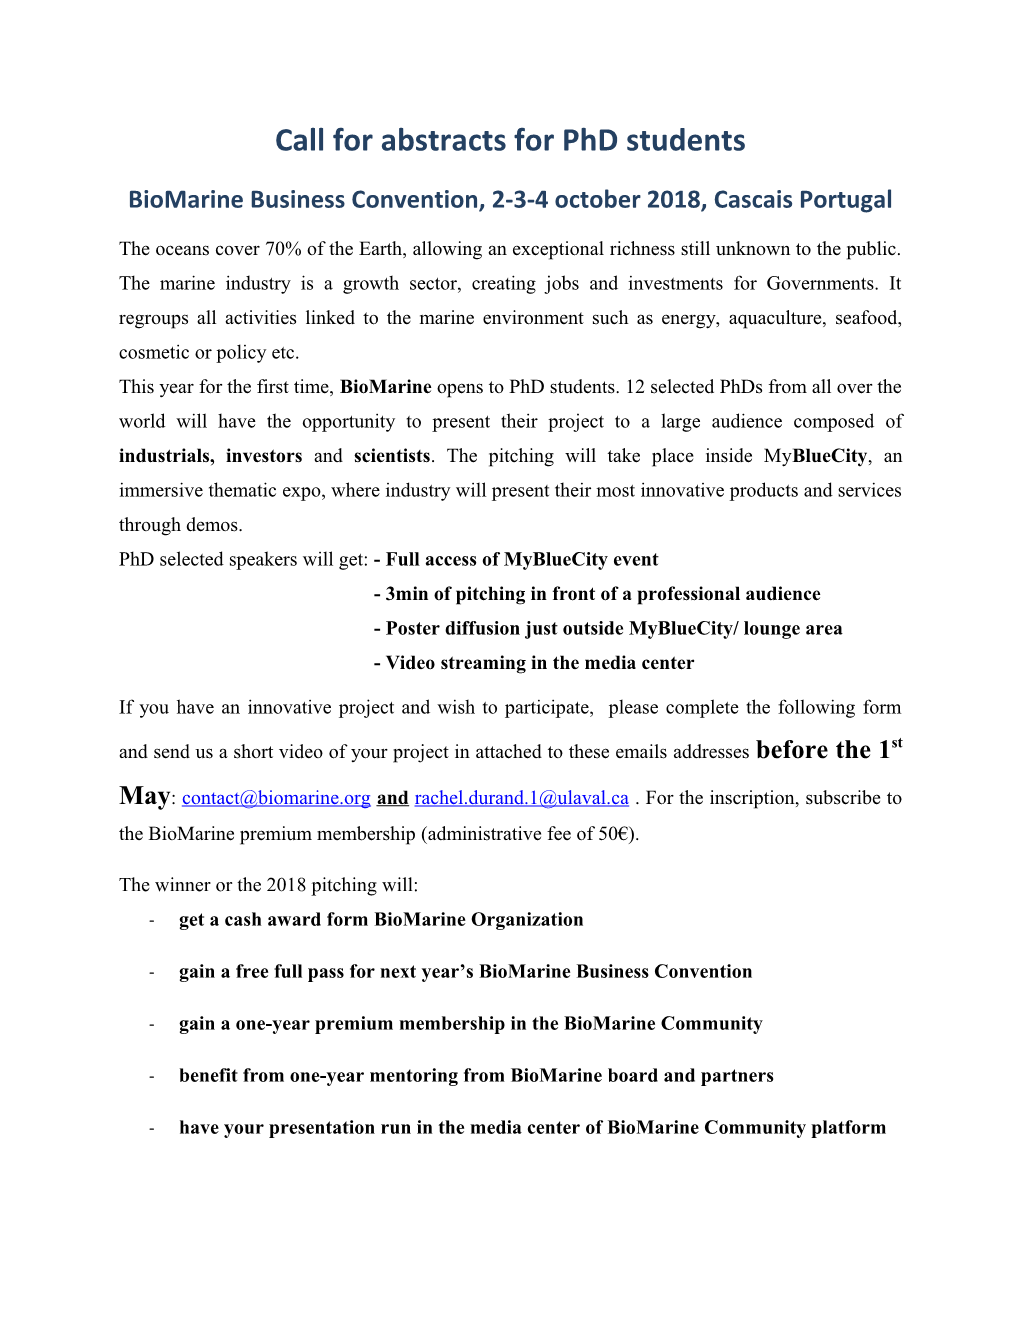 Call for Abstracts for Phd Students